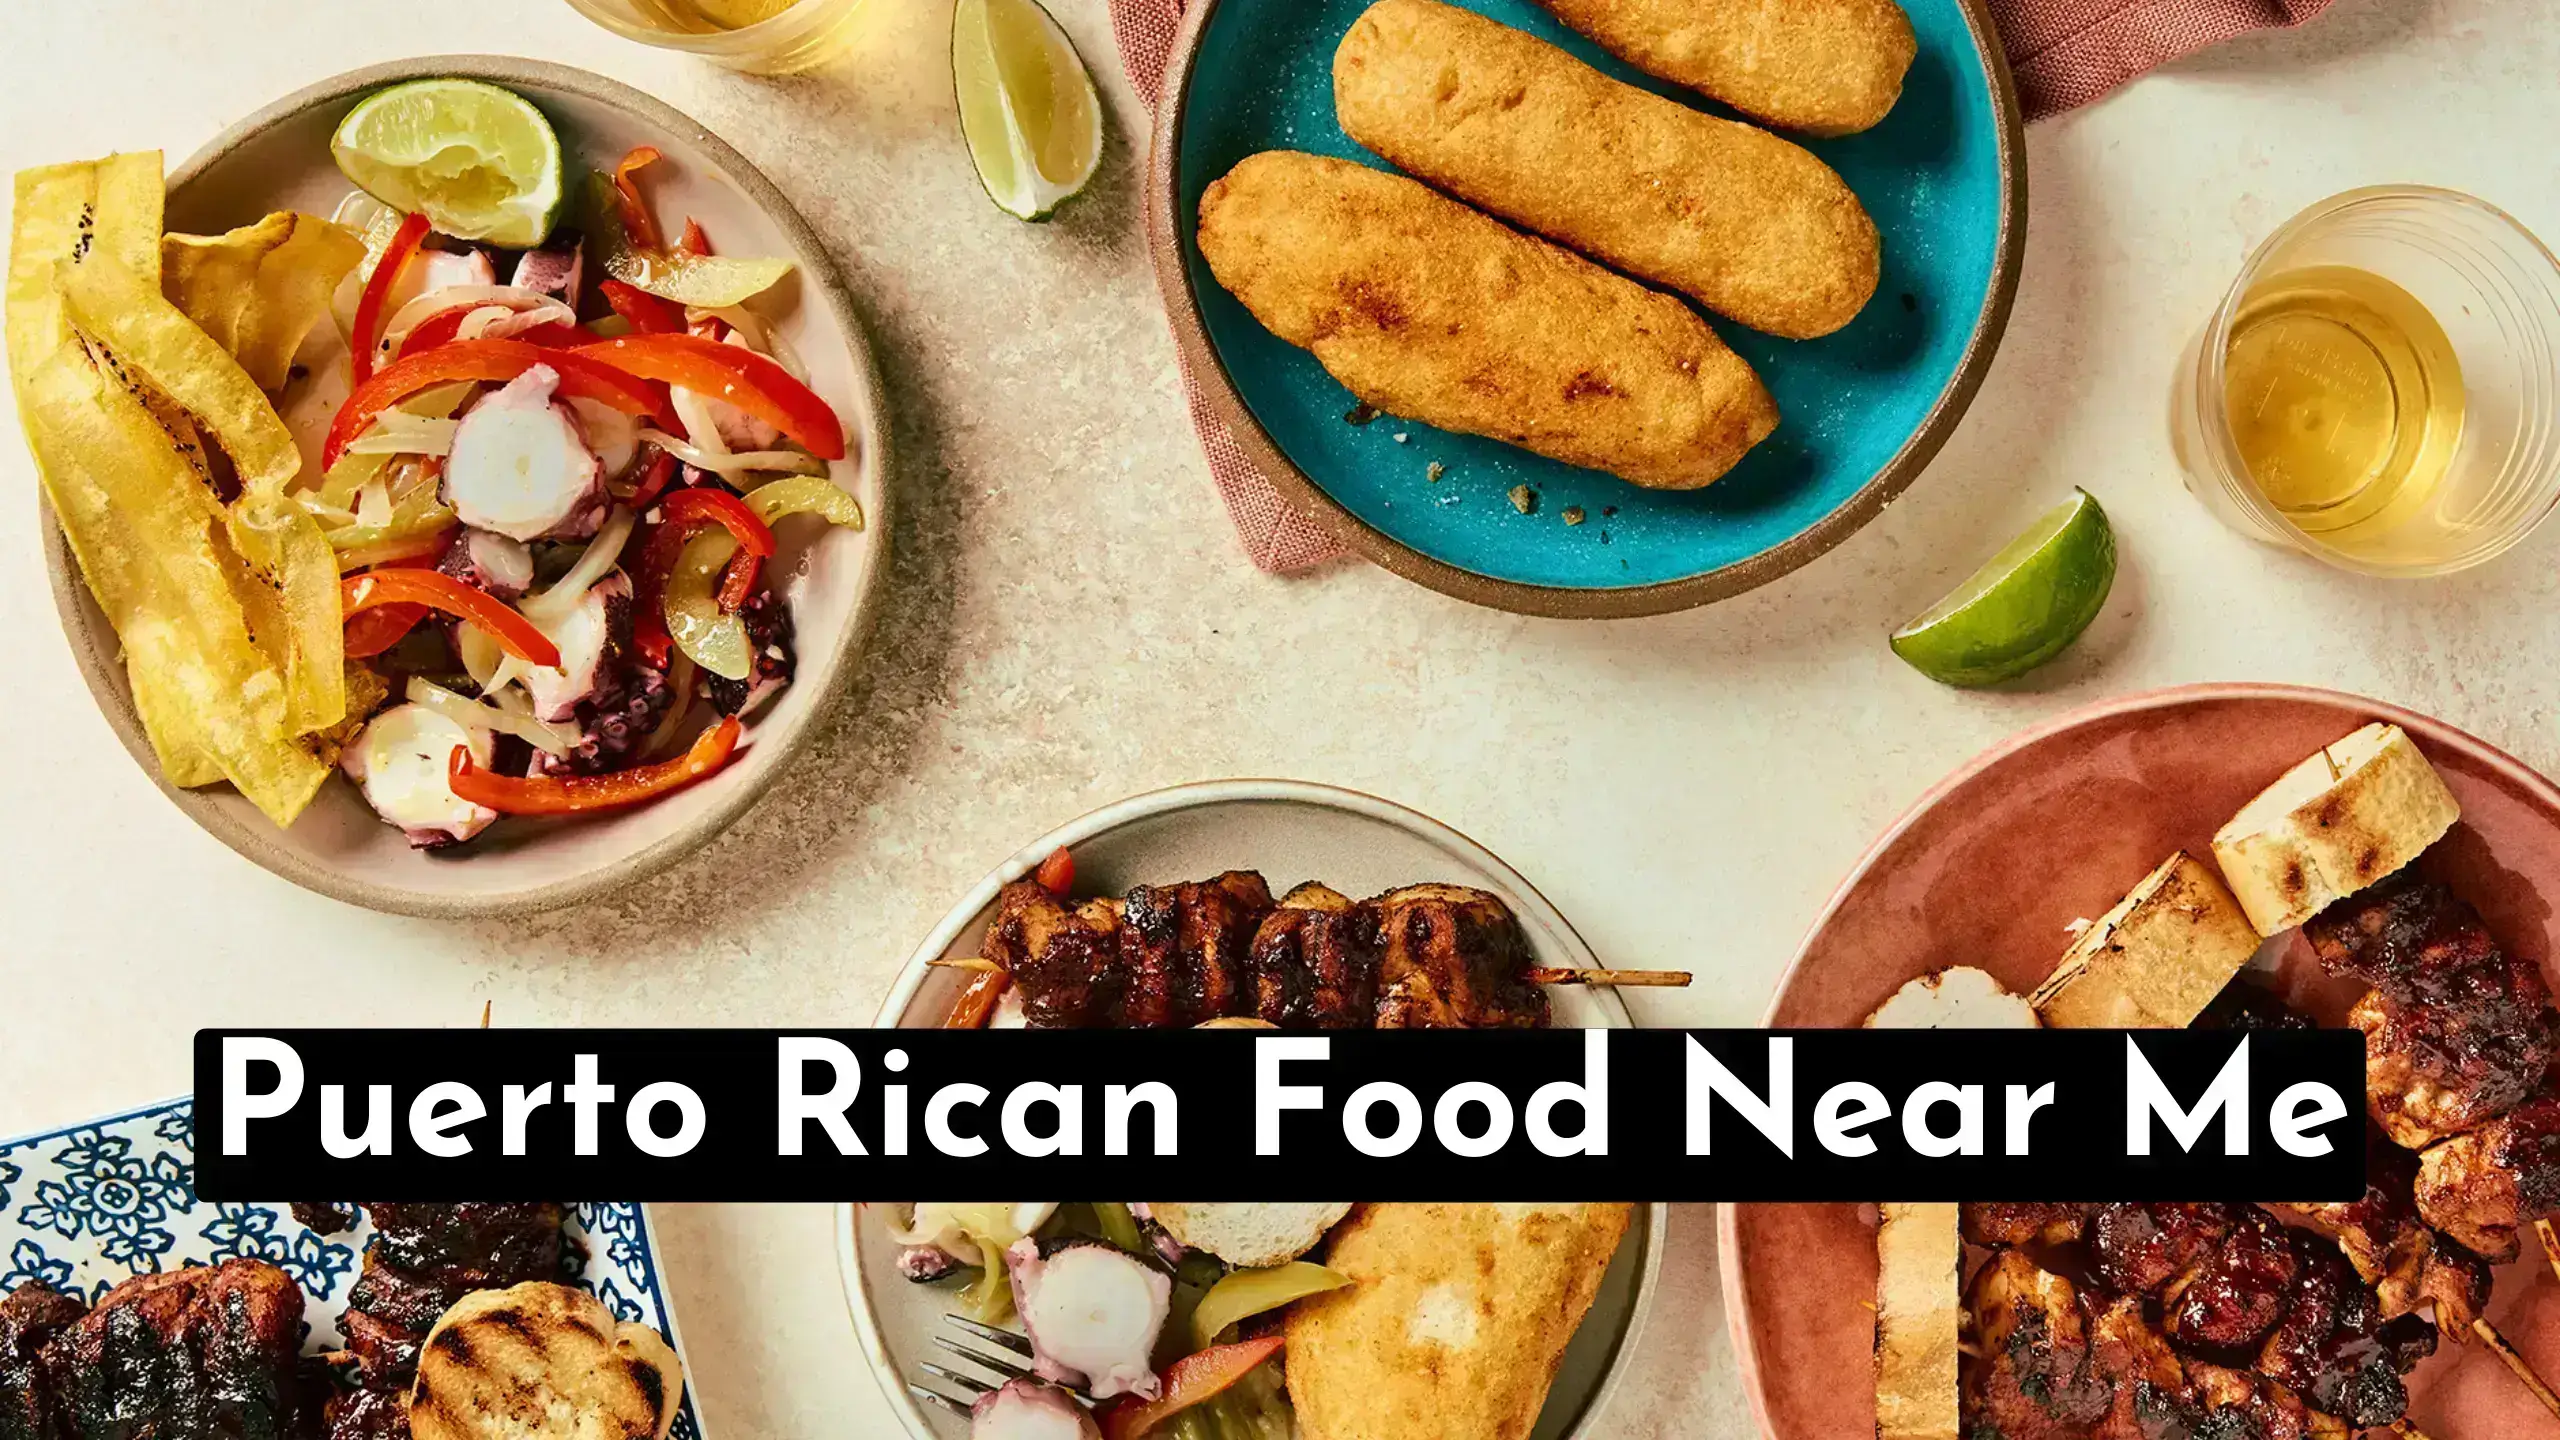 A Quick Guide To Find Puerto Rican Food Near Me | Also Quickly Find What Are The Best Dishes To Try In Puerto Rican Restaurants Near To Me.